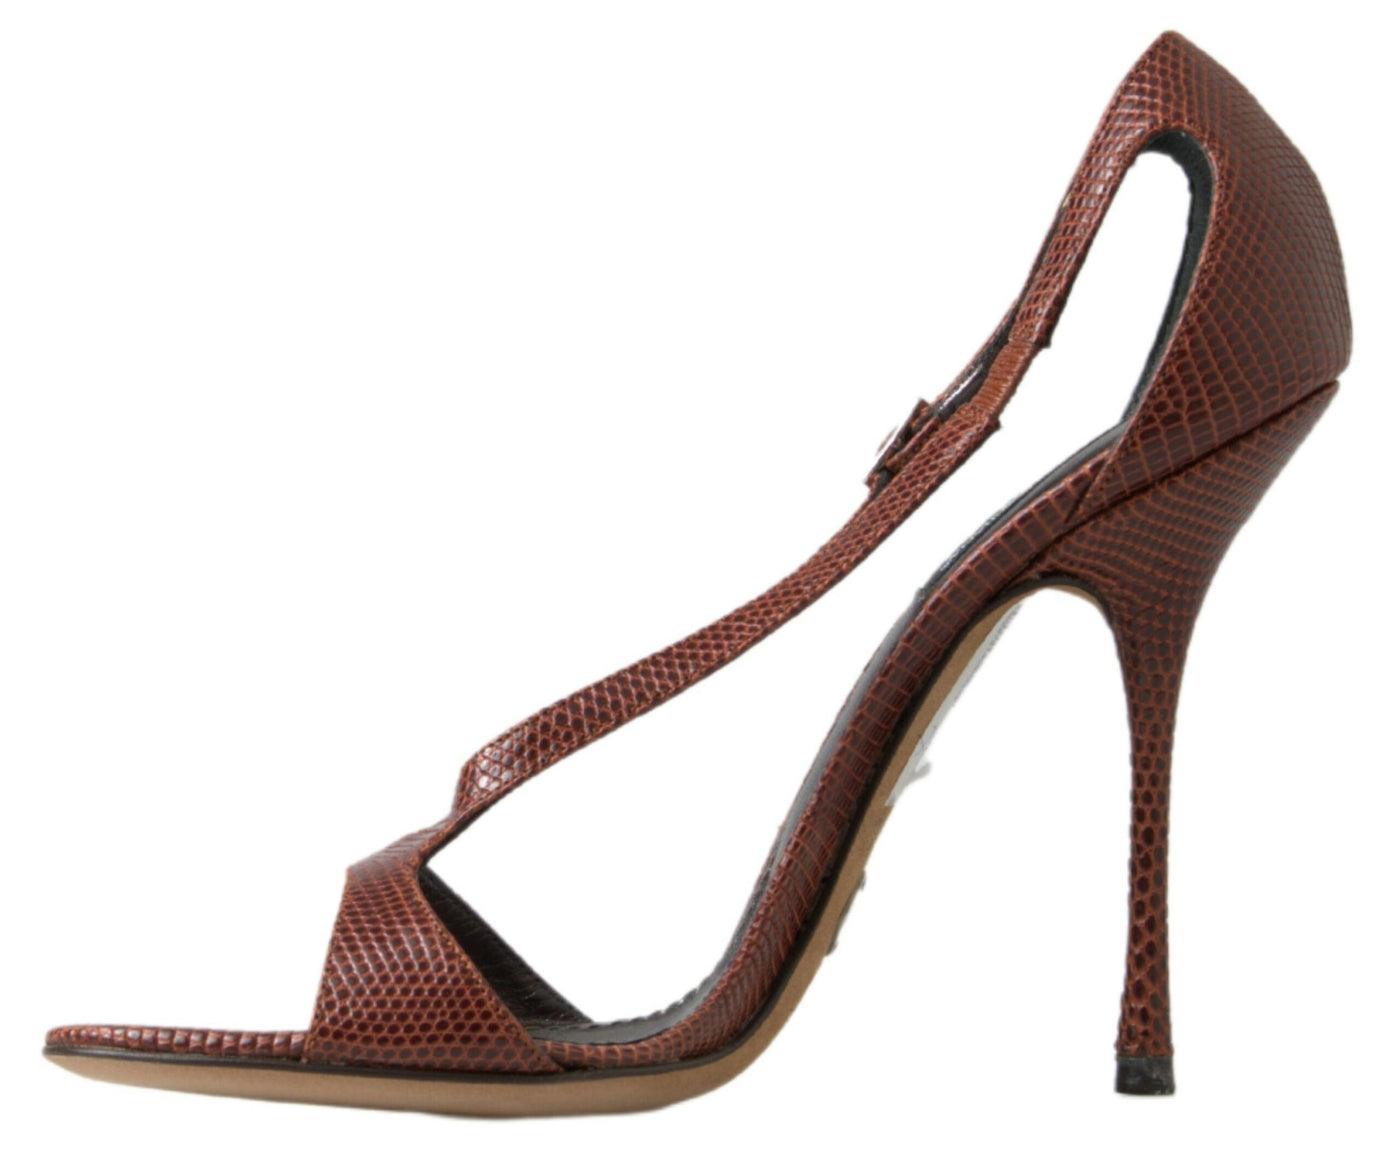 Dolce & Gabbana Brown Leather High Heels Sandals Shoes